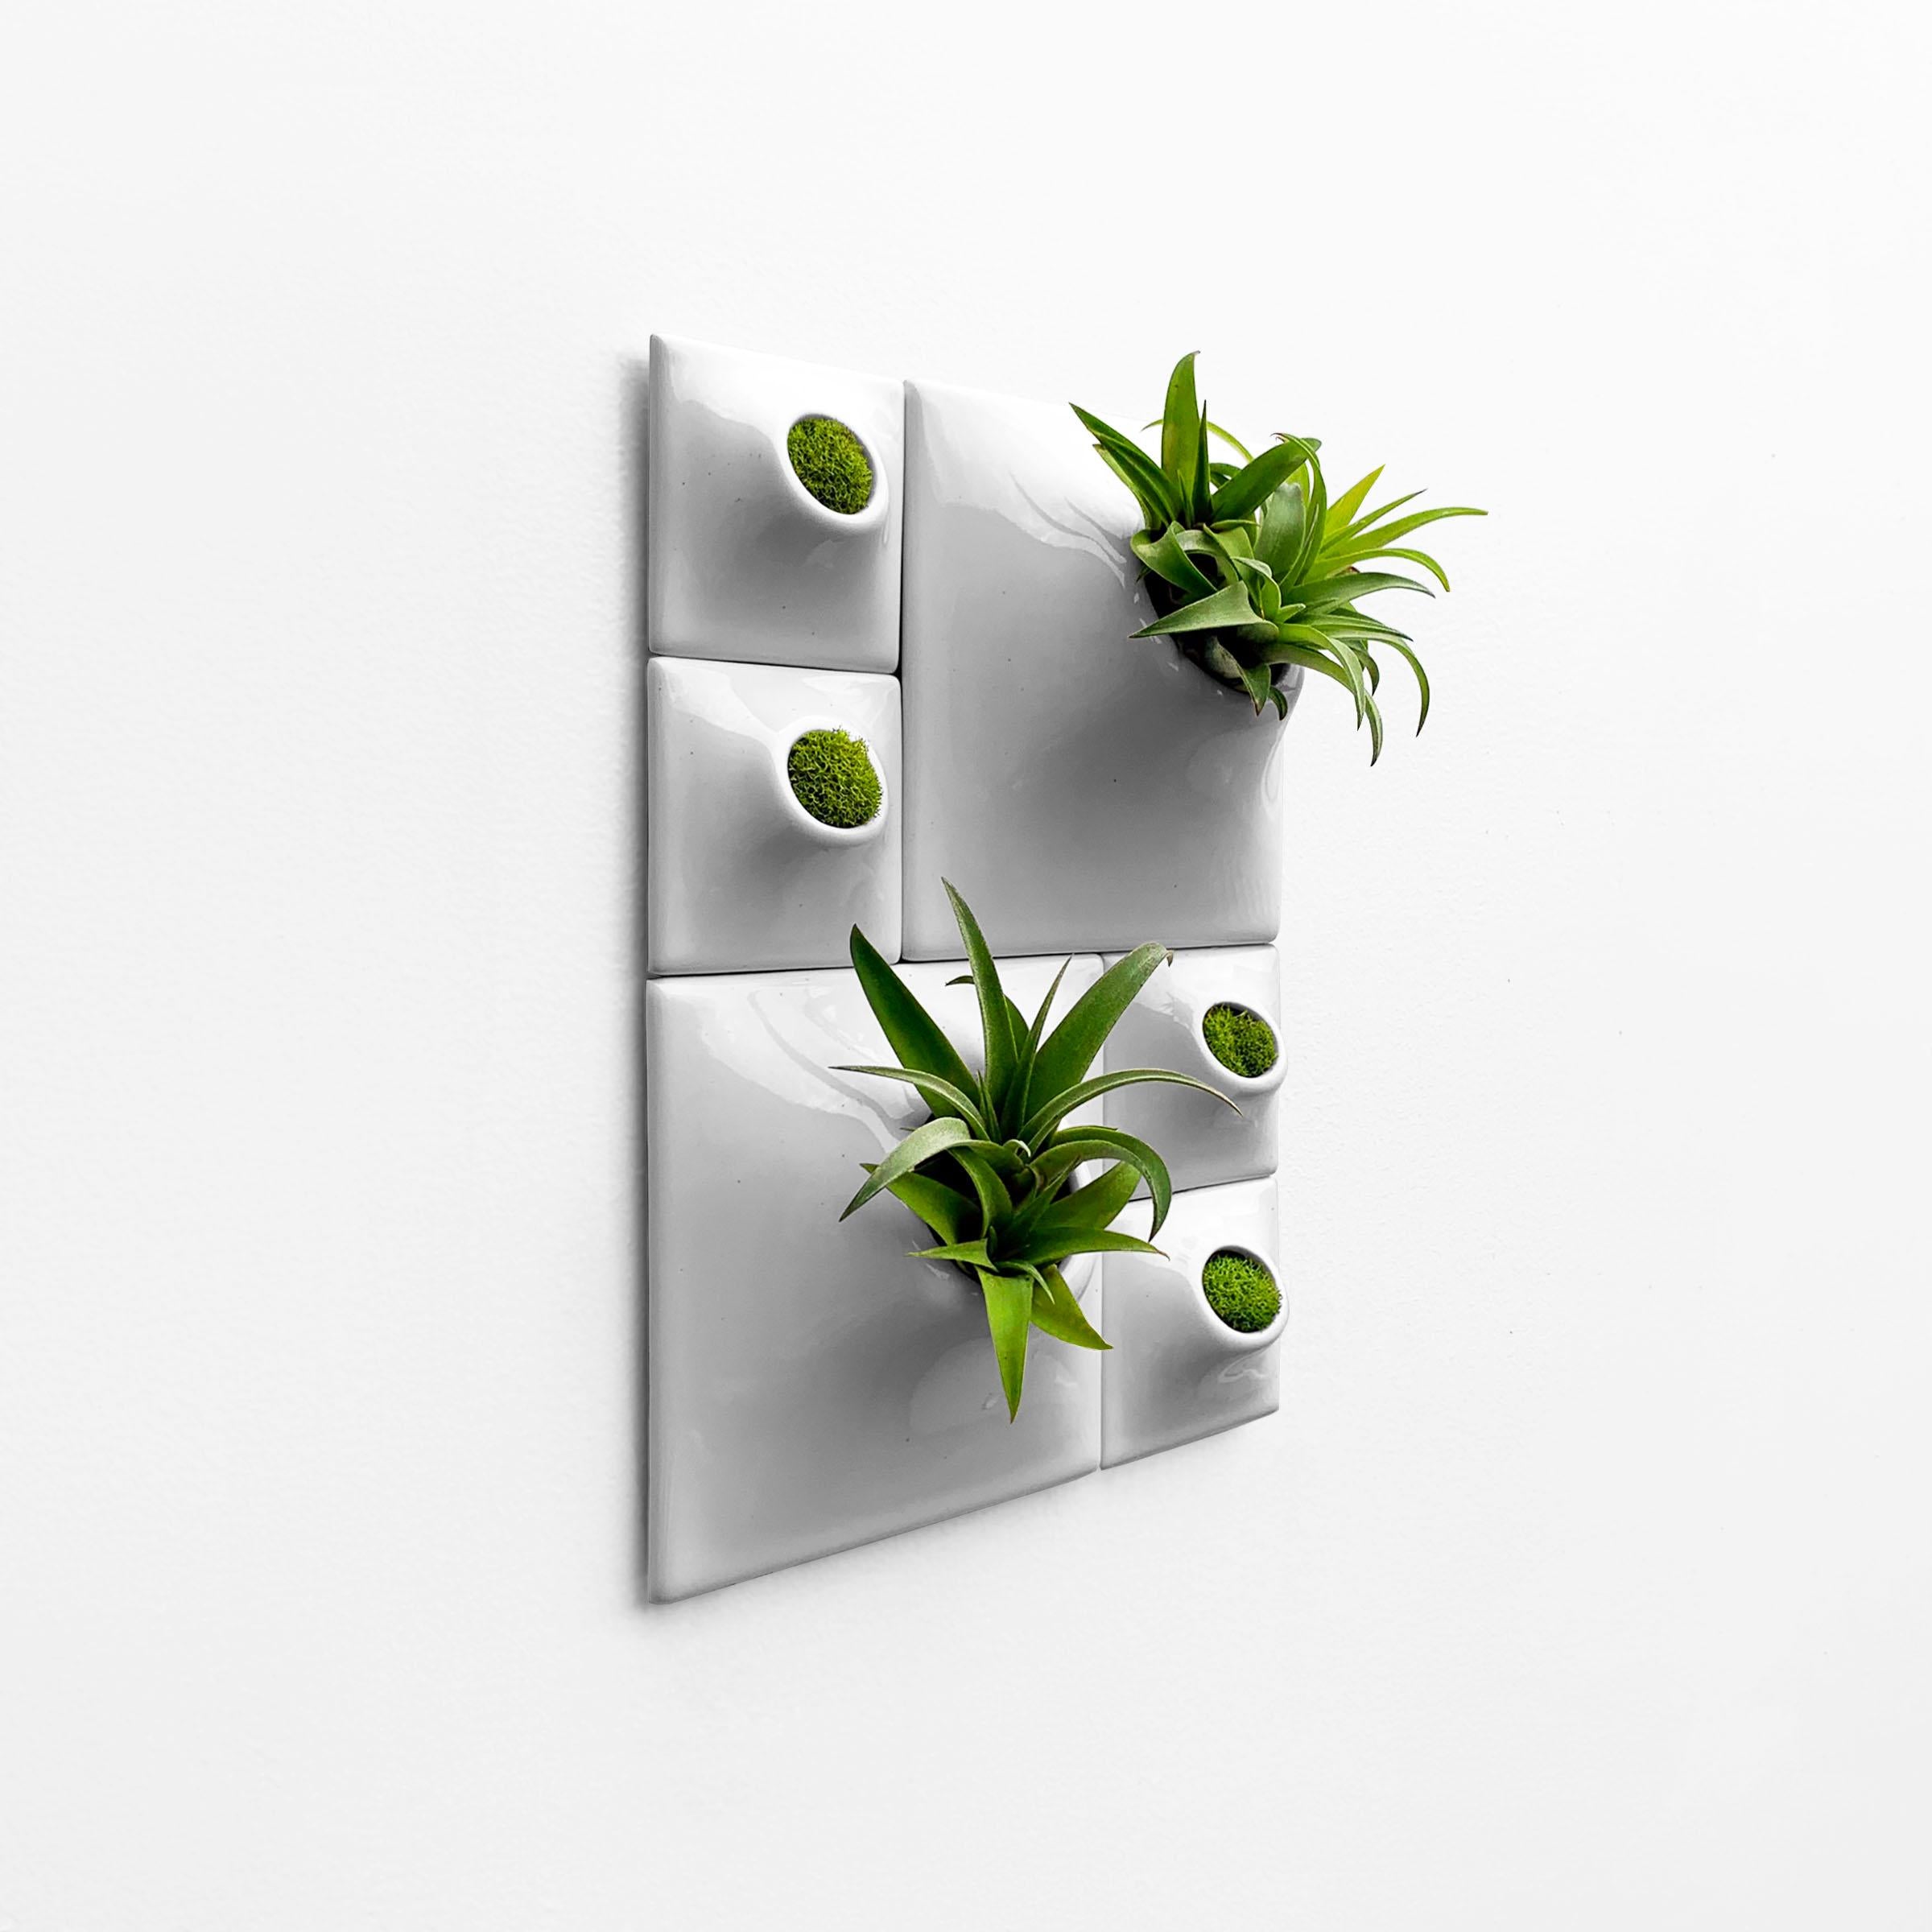 Modern Gray Wall Planter Set, Living Wall Sculpture, Moss Wall Art, Node BR2L In New Condition For Sale In Bridgeport, PA